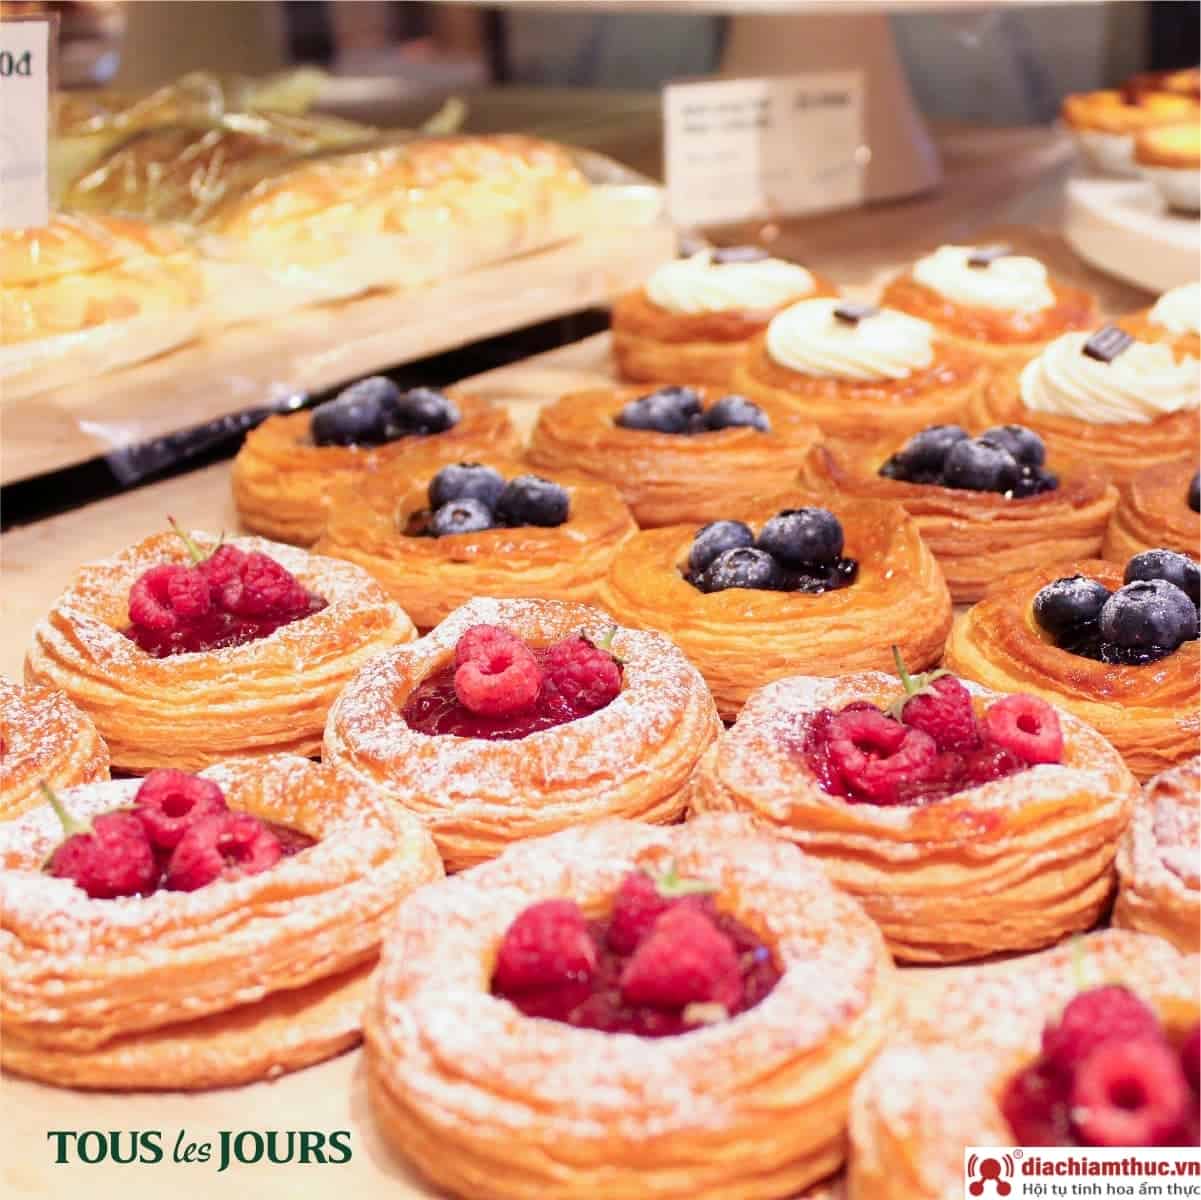 Tous Les Jours, every day fresh